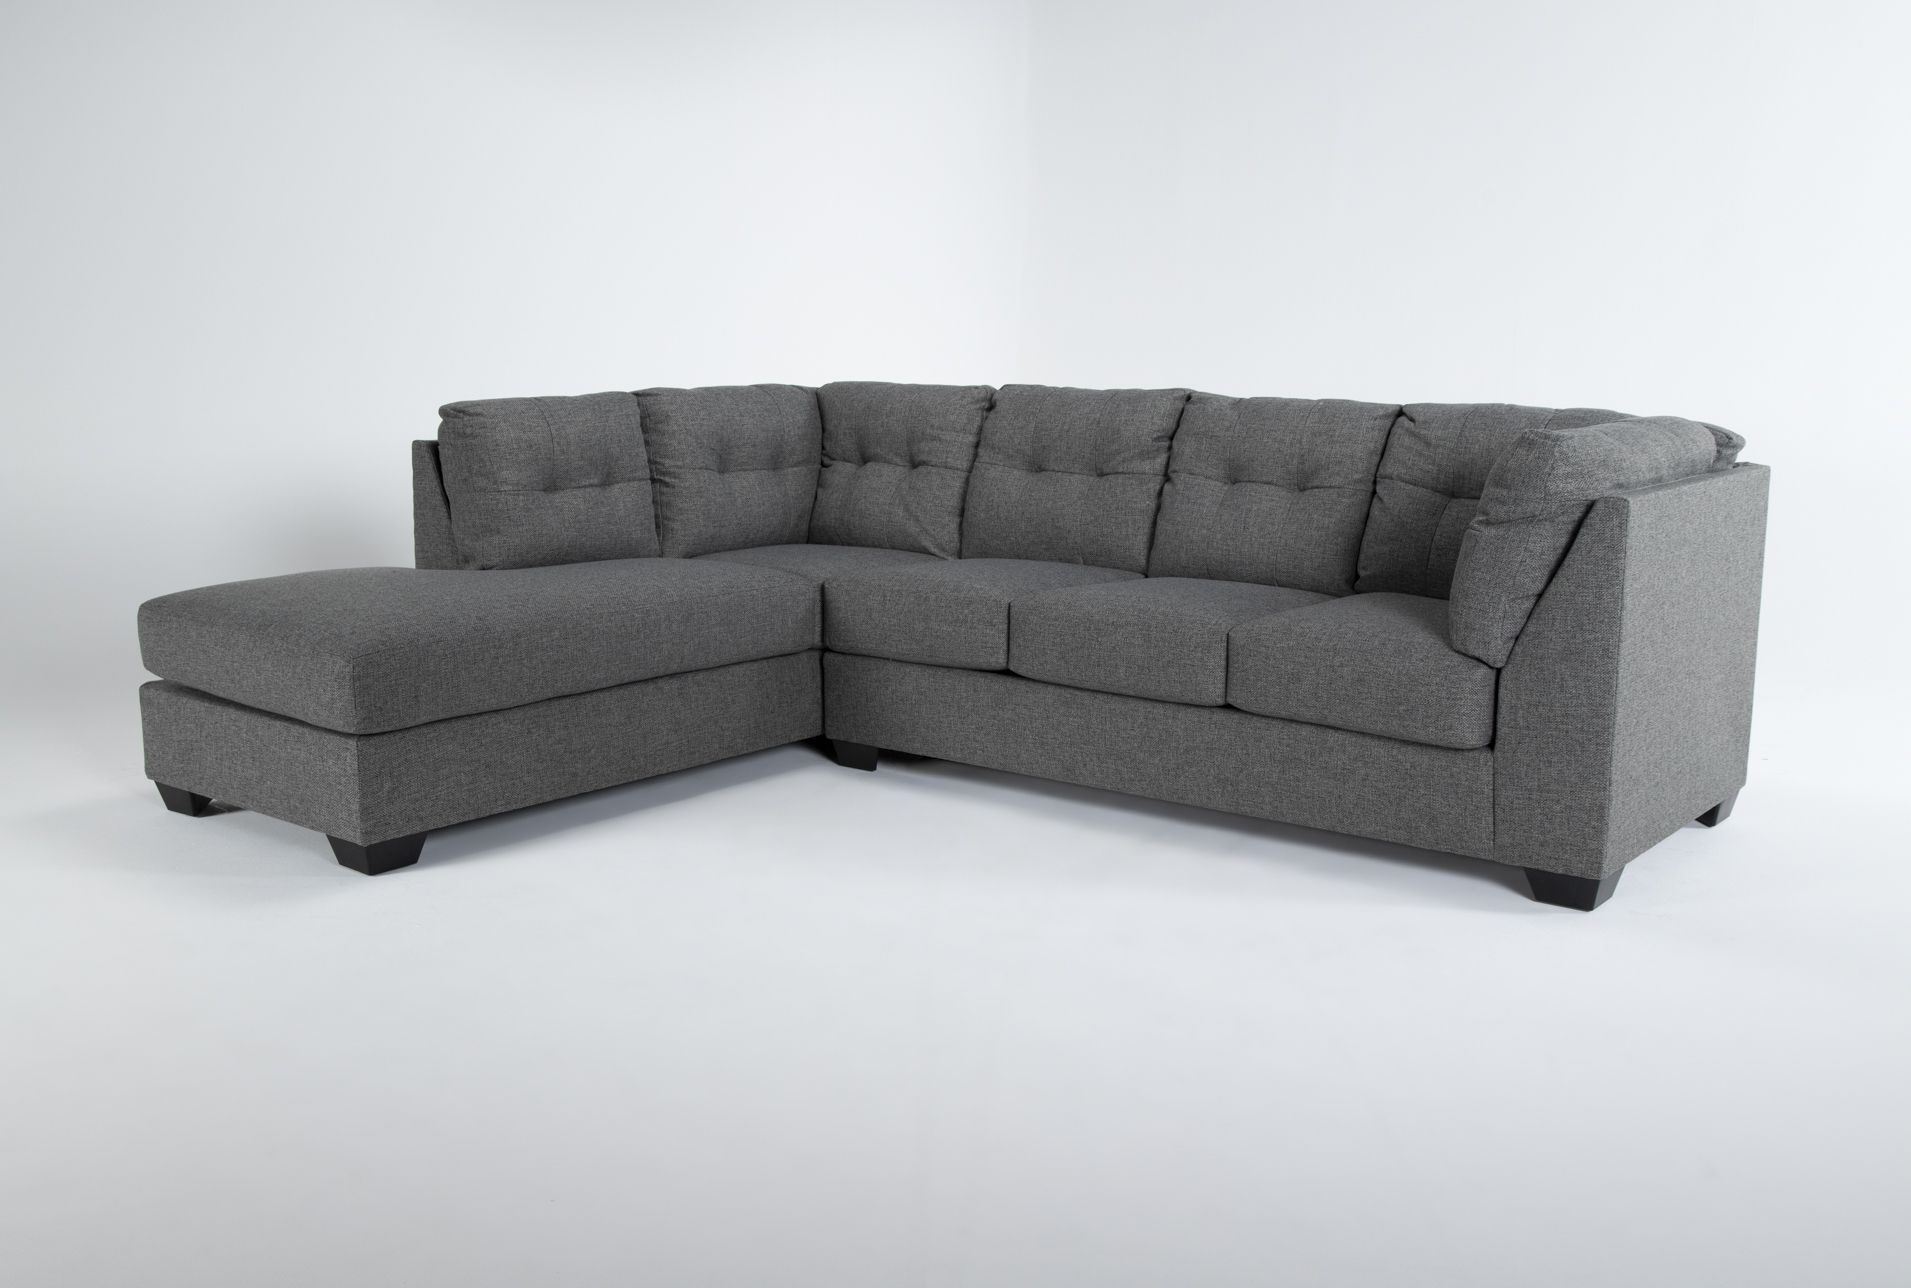 Arrowmask Charcoal 2 Piece 115" Full Sleeper Sectional With Left Arm Within Left Or Right Facing Sleeper Sectionals (Gallery 4 of 21)